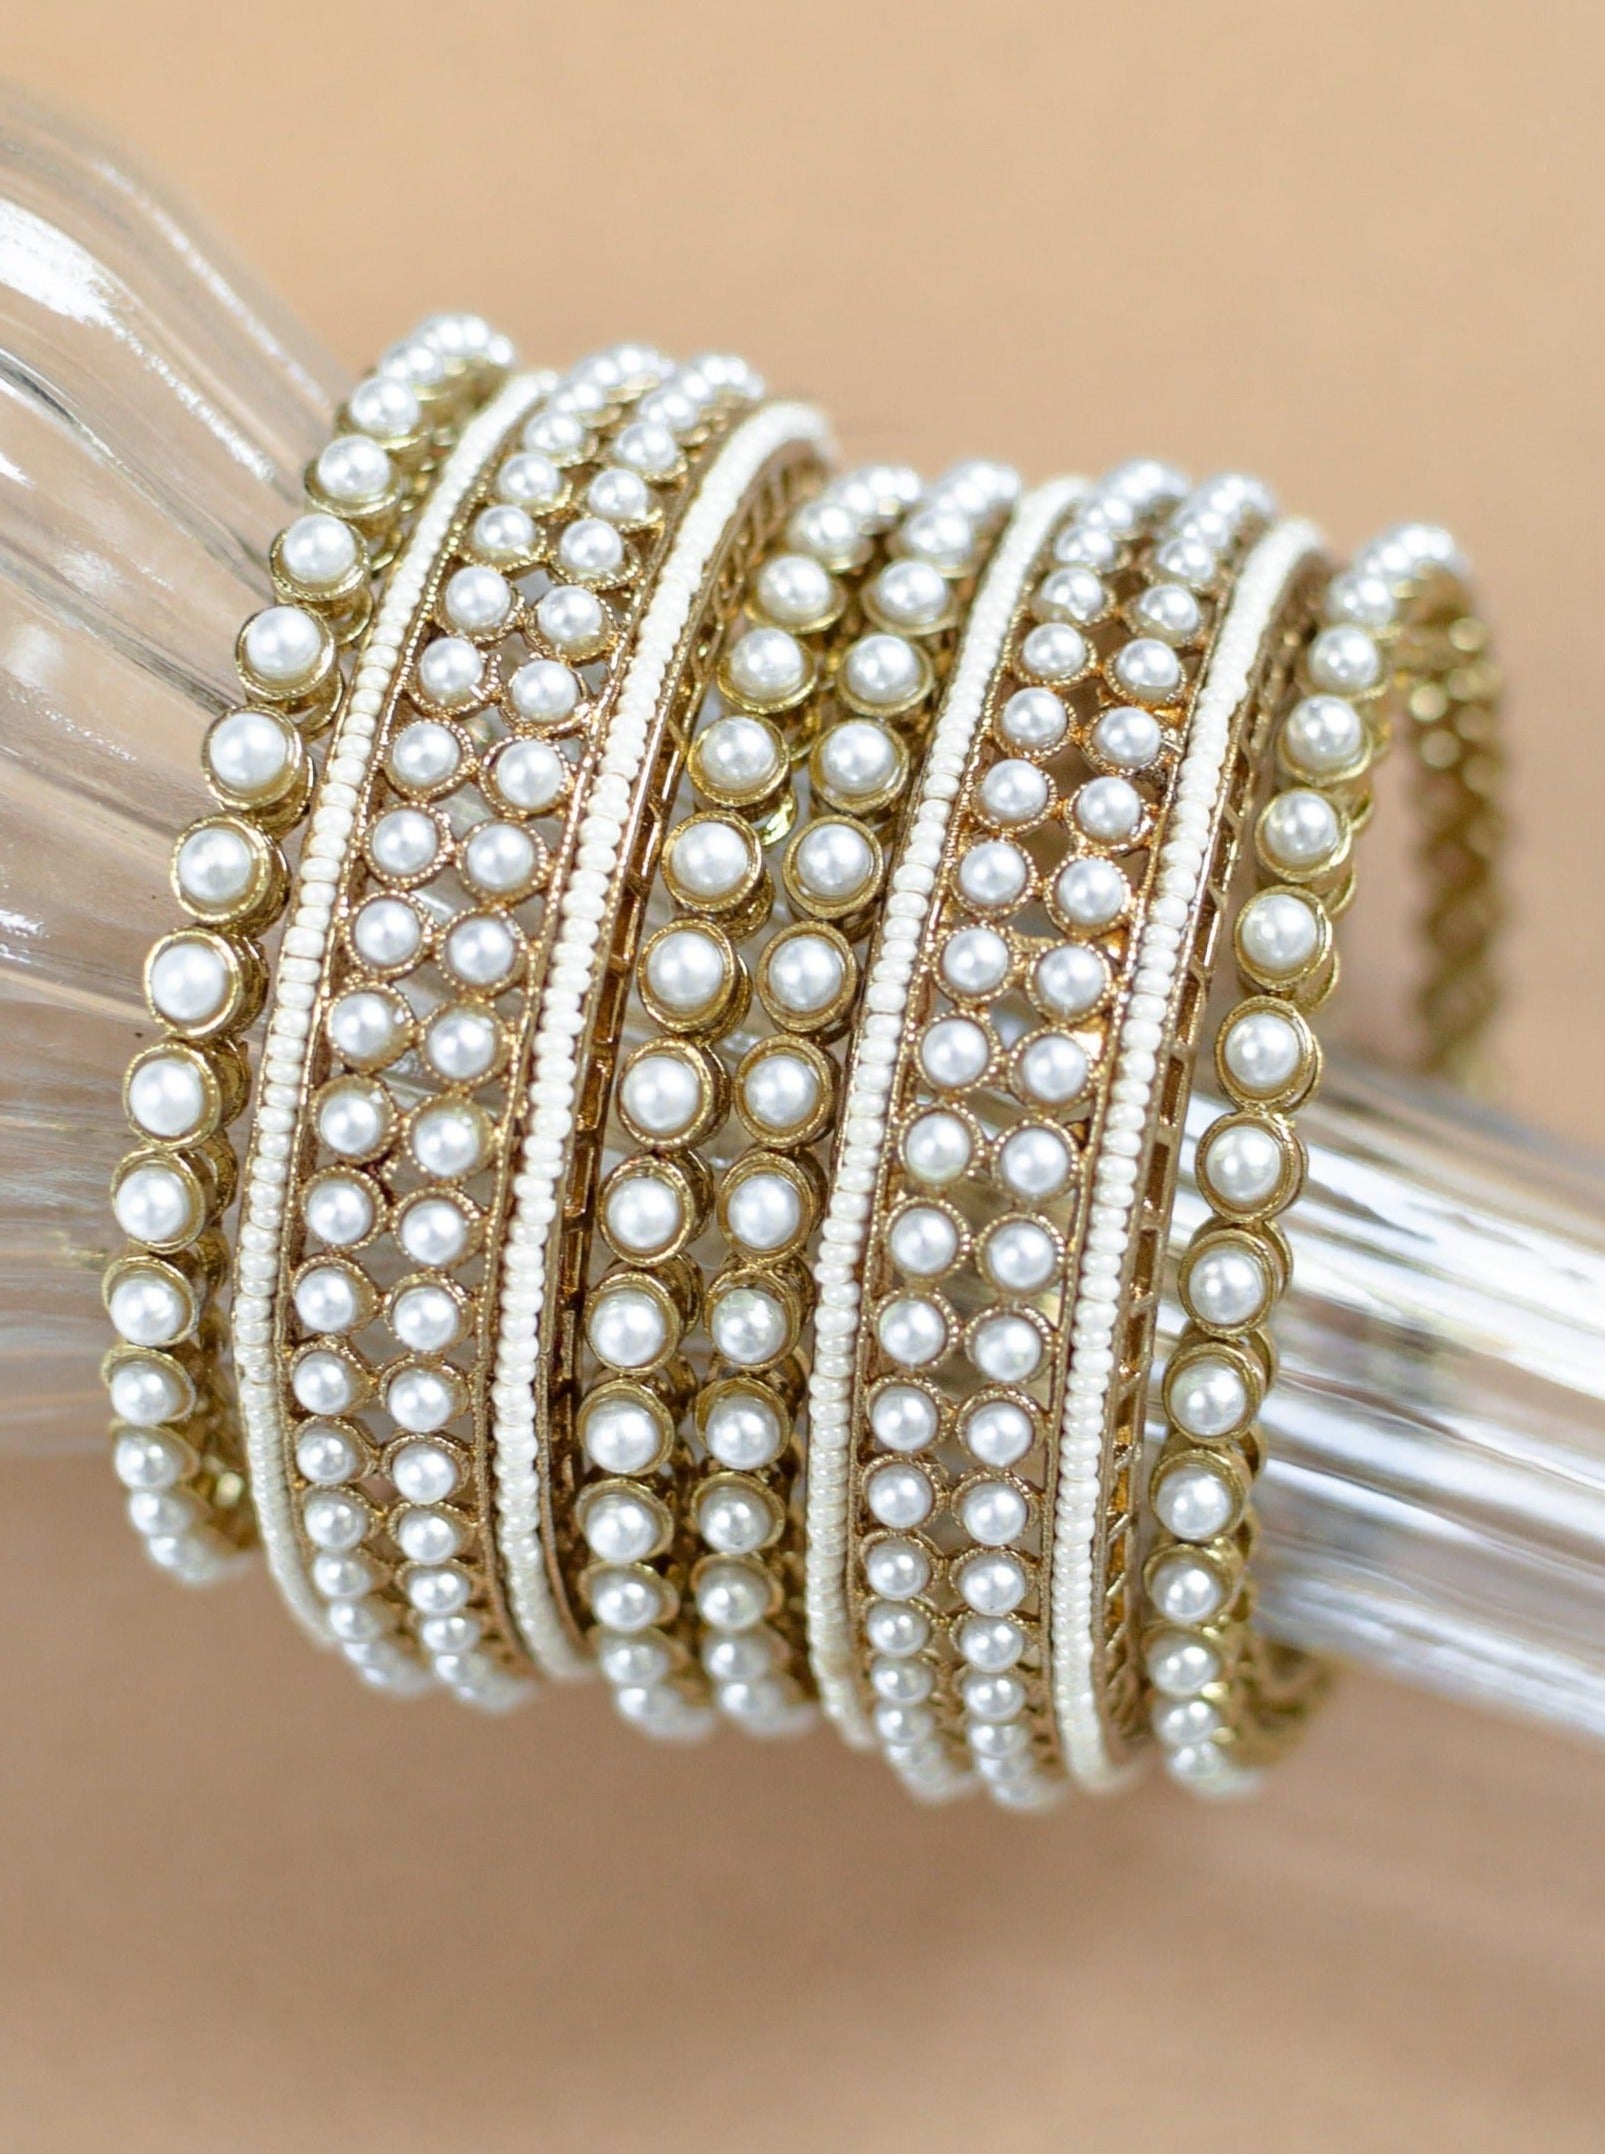 Indian bridal jewelry - pearl bangles in gold